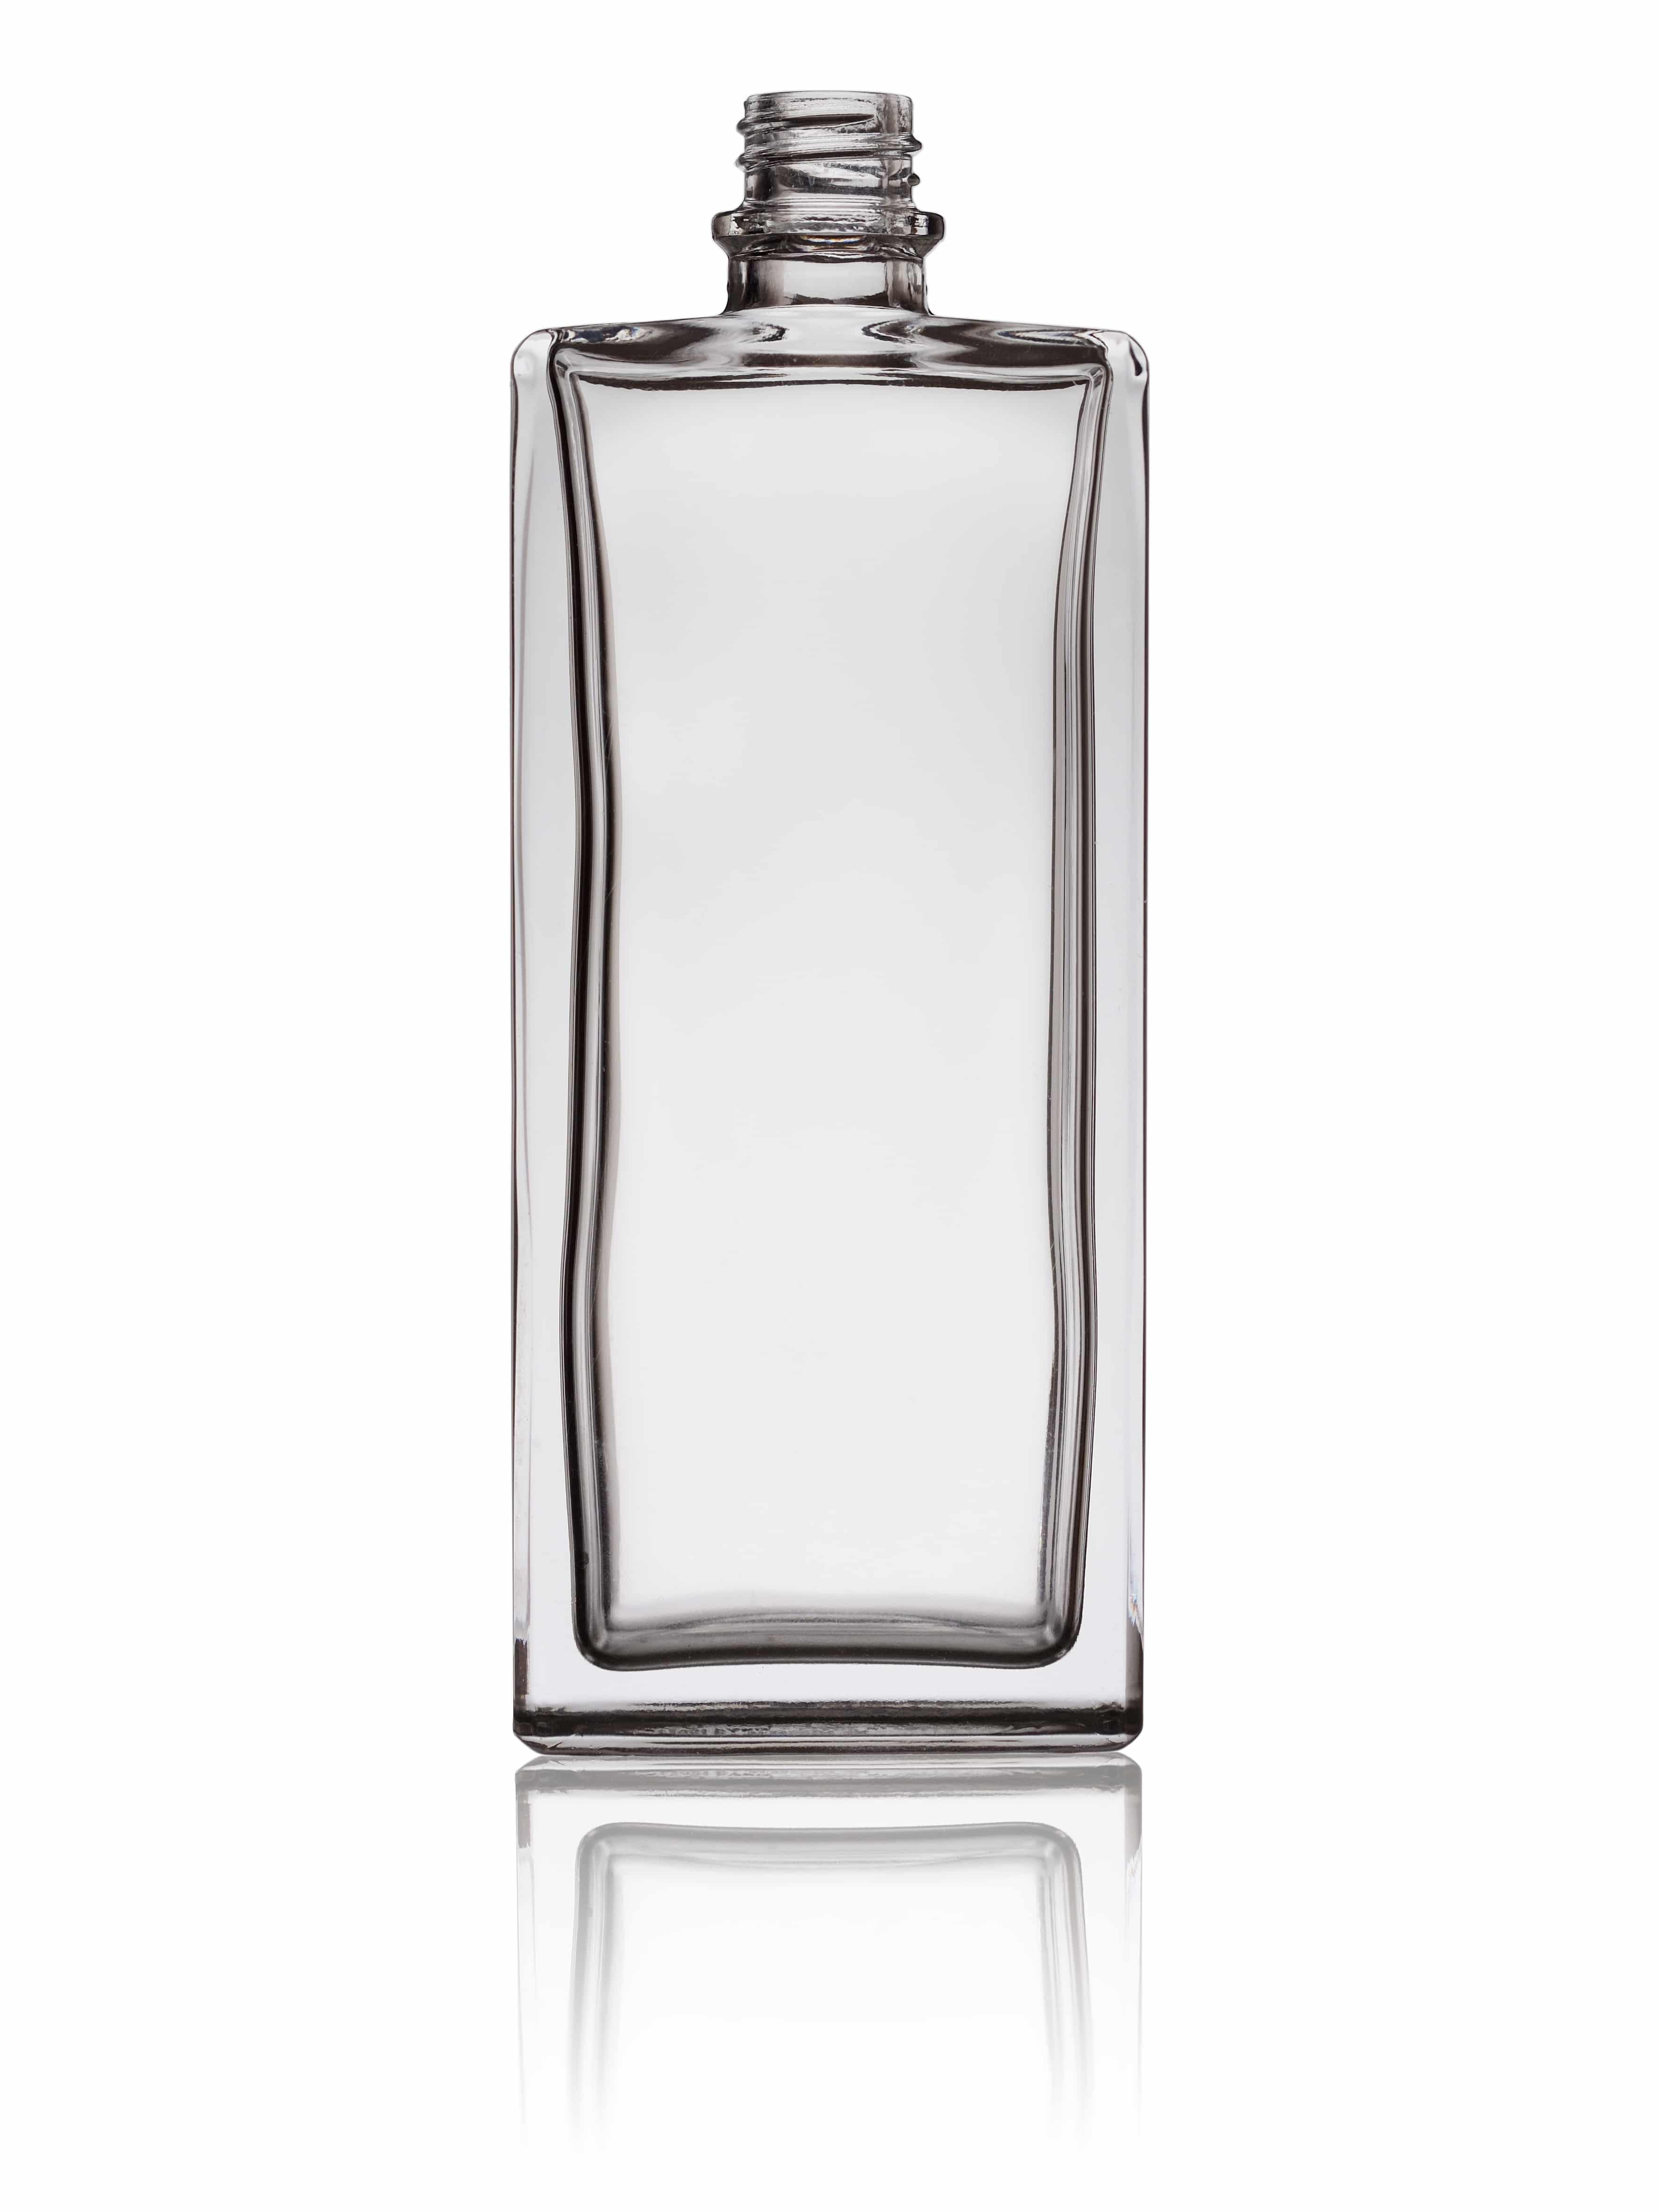 empty glass perfume bottle isolated on a white background with reflection